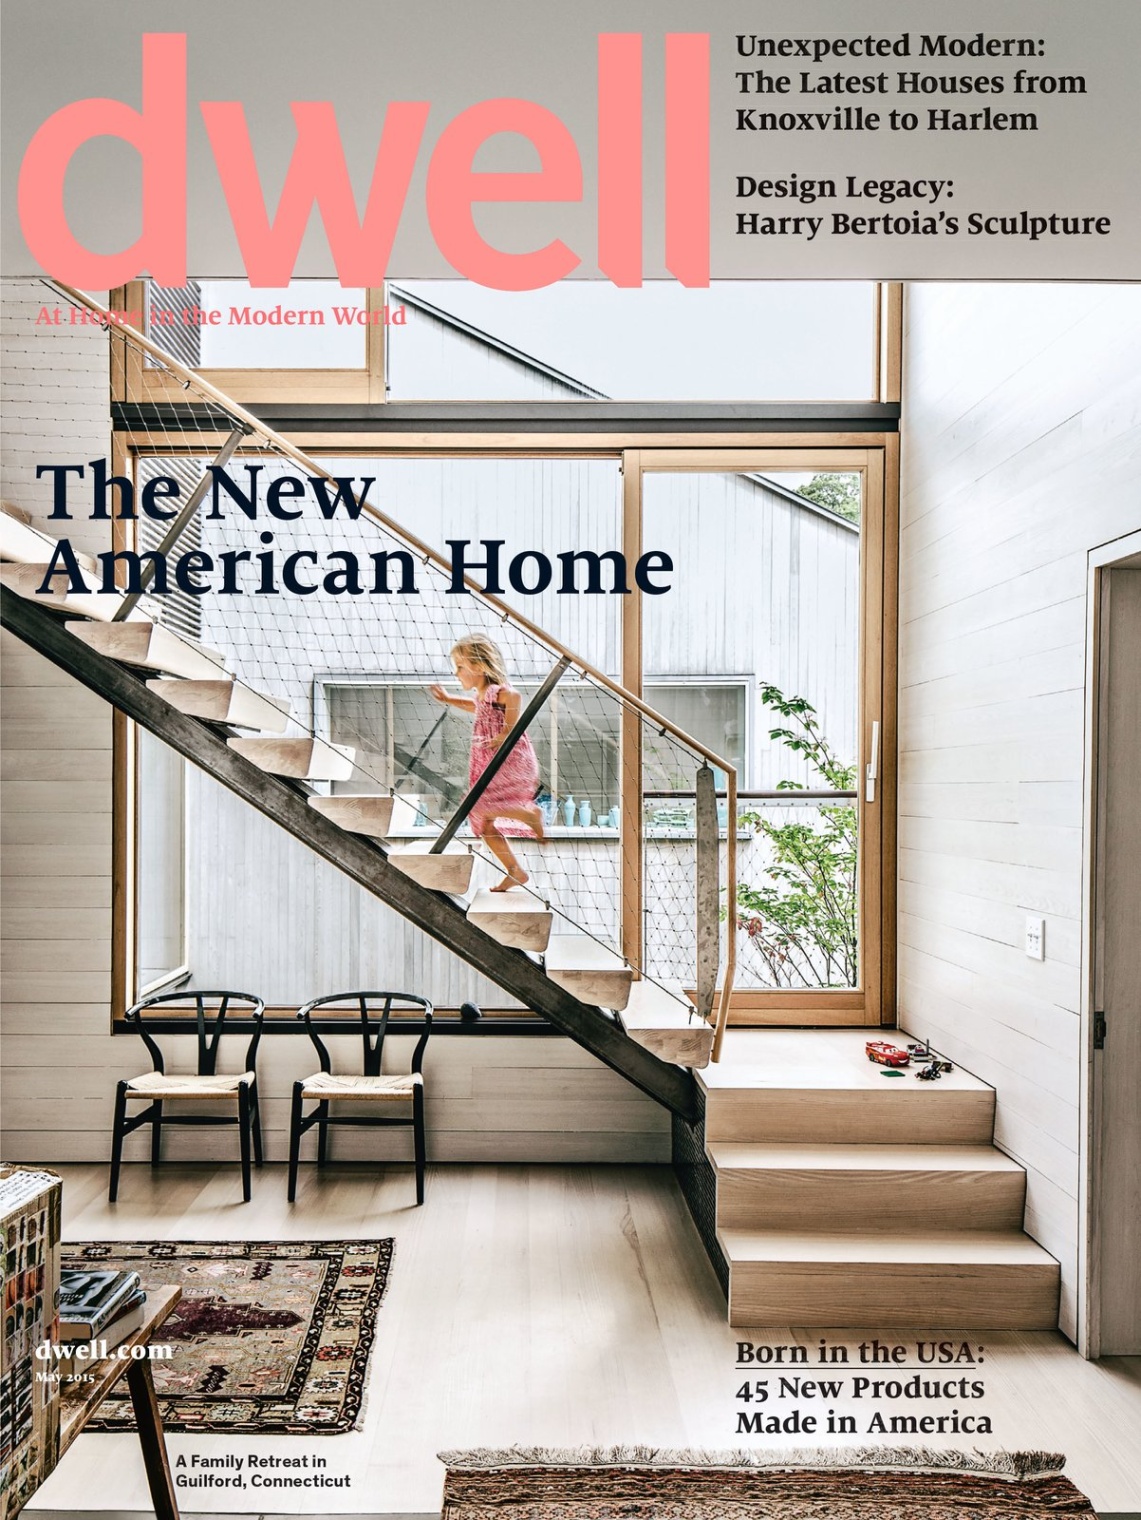 american home design knoxville Bulan 3 The New American Home - Dwell